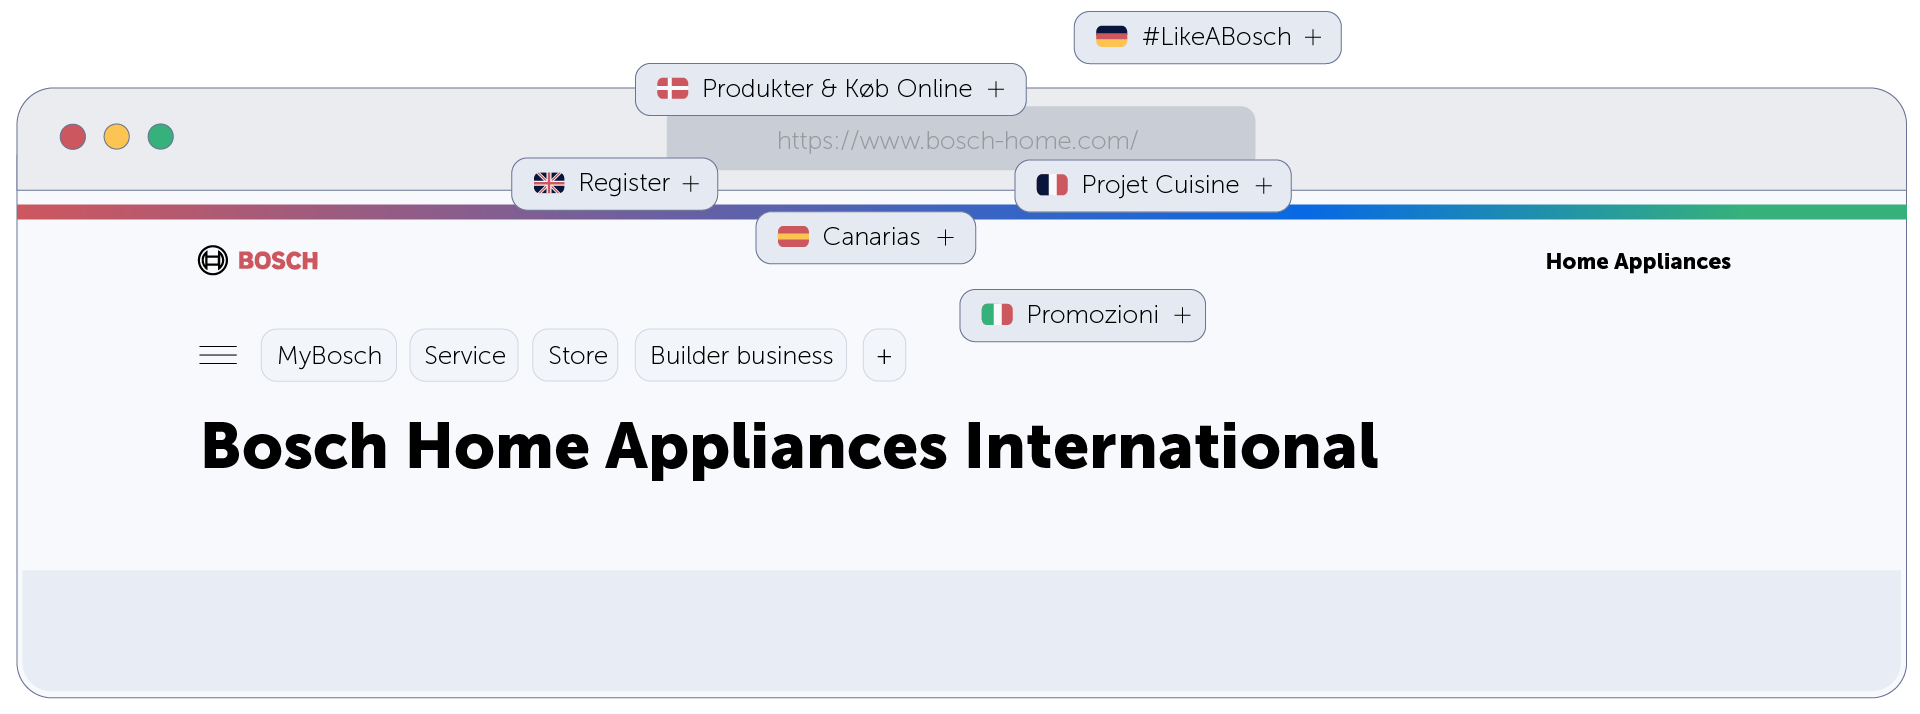 Mouseflow helped B/S/H optimize the navigation for different website localizations